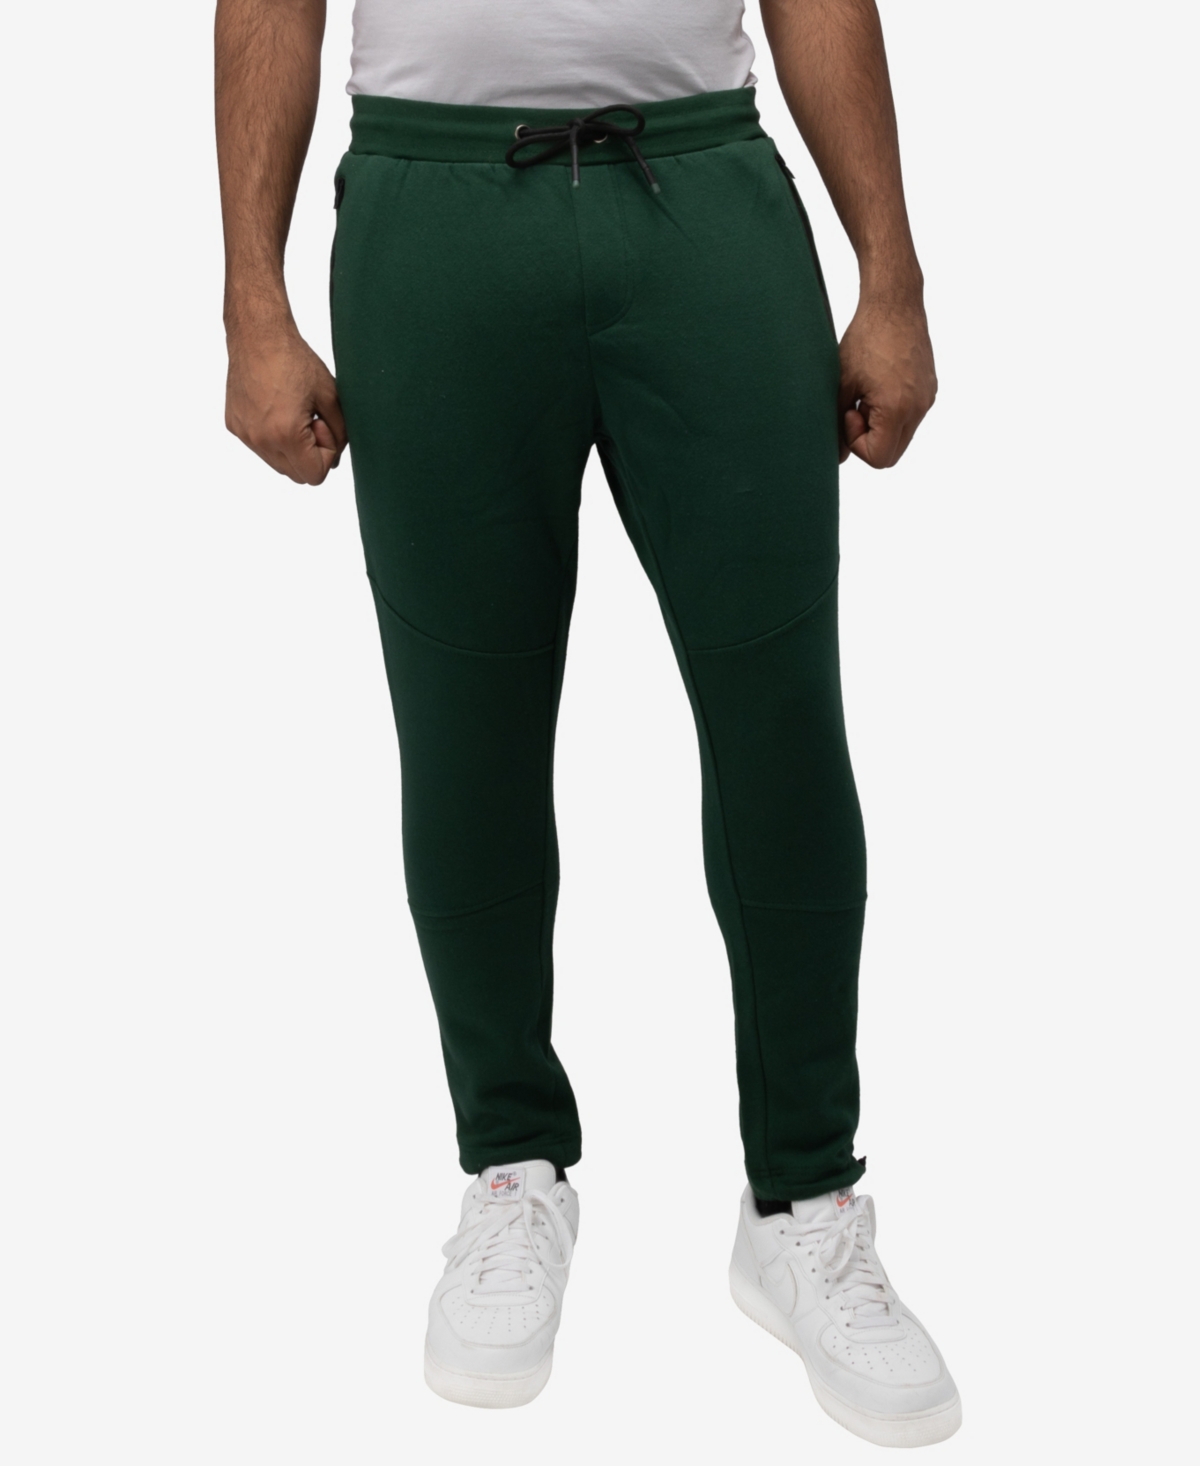 X-ray Men's Fleece Adjustable Ankle Drawstring Joggers Pants In Forest Green